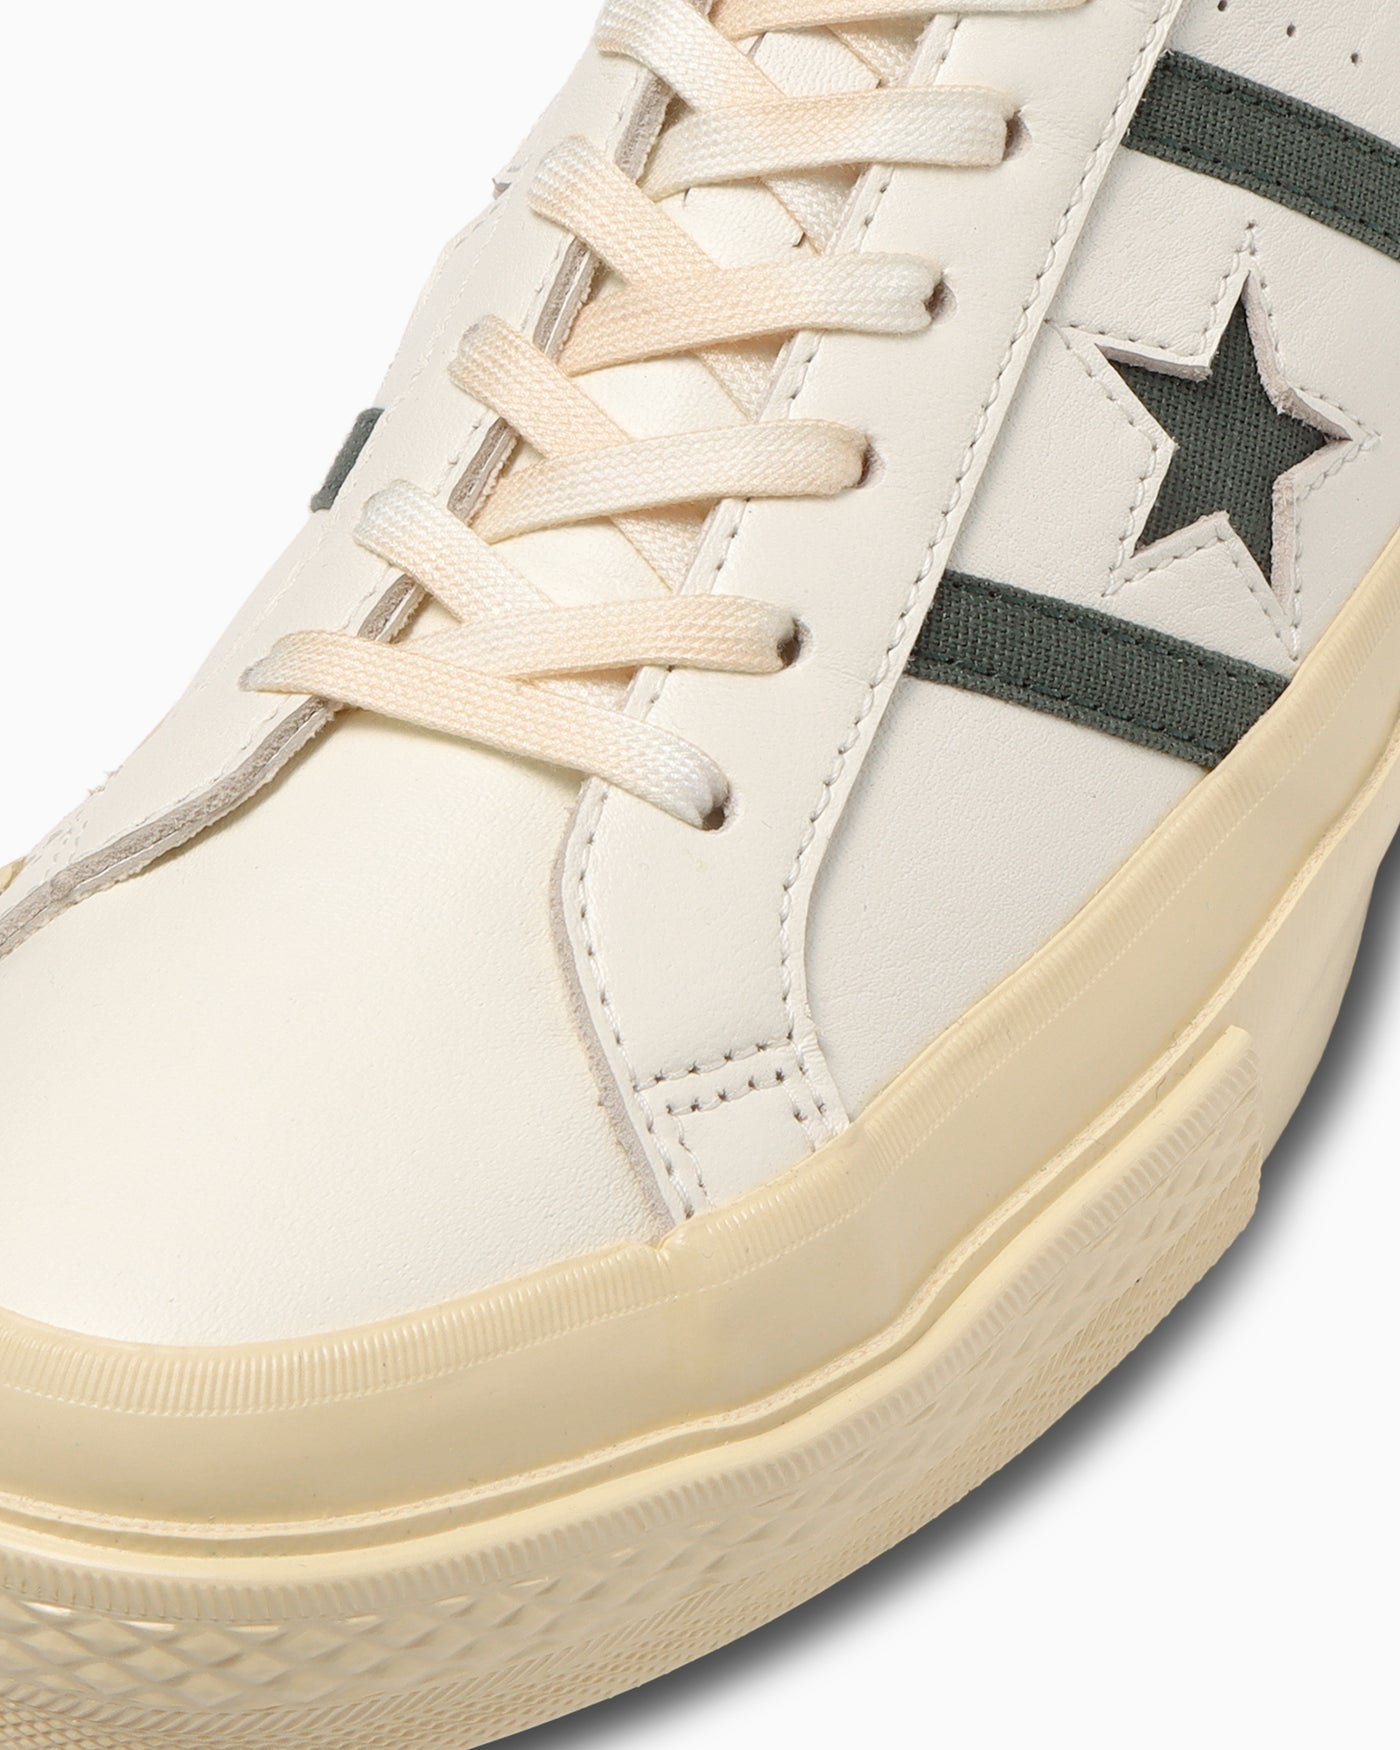 STAR&BARS US PC LEATHER